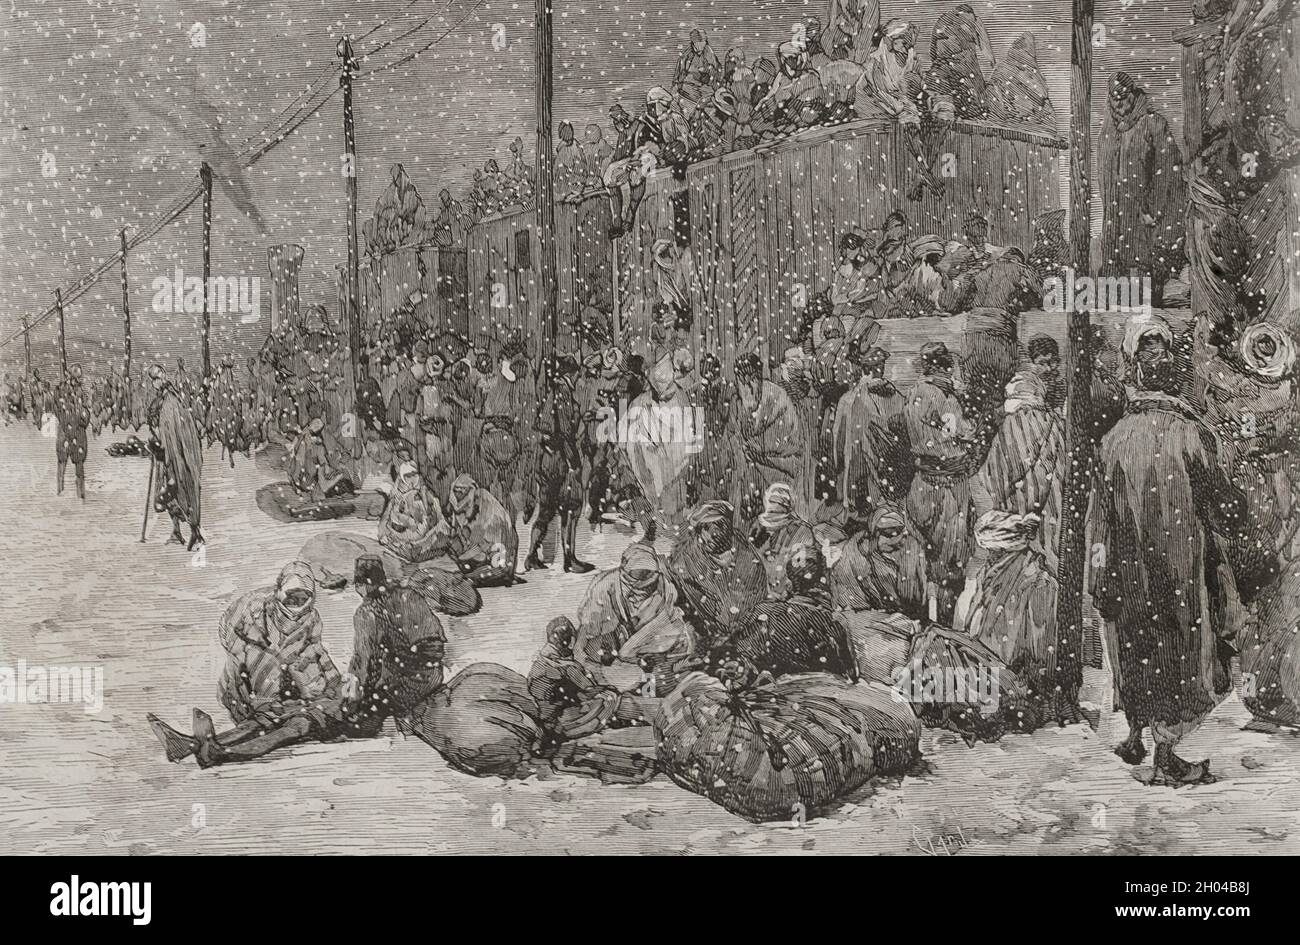 Russo-Turkish War (1877-1878). Arrival to Constantinople by train of inhabitants of Andrinopolis fleeing from the invading Russian army. Engraving by Capuz. La Ilustración Española y Americana, 1878. Stock Photo